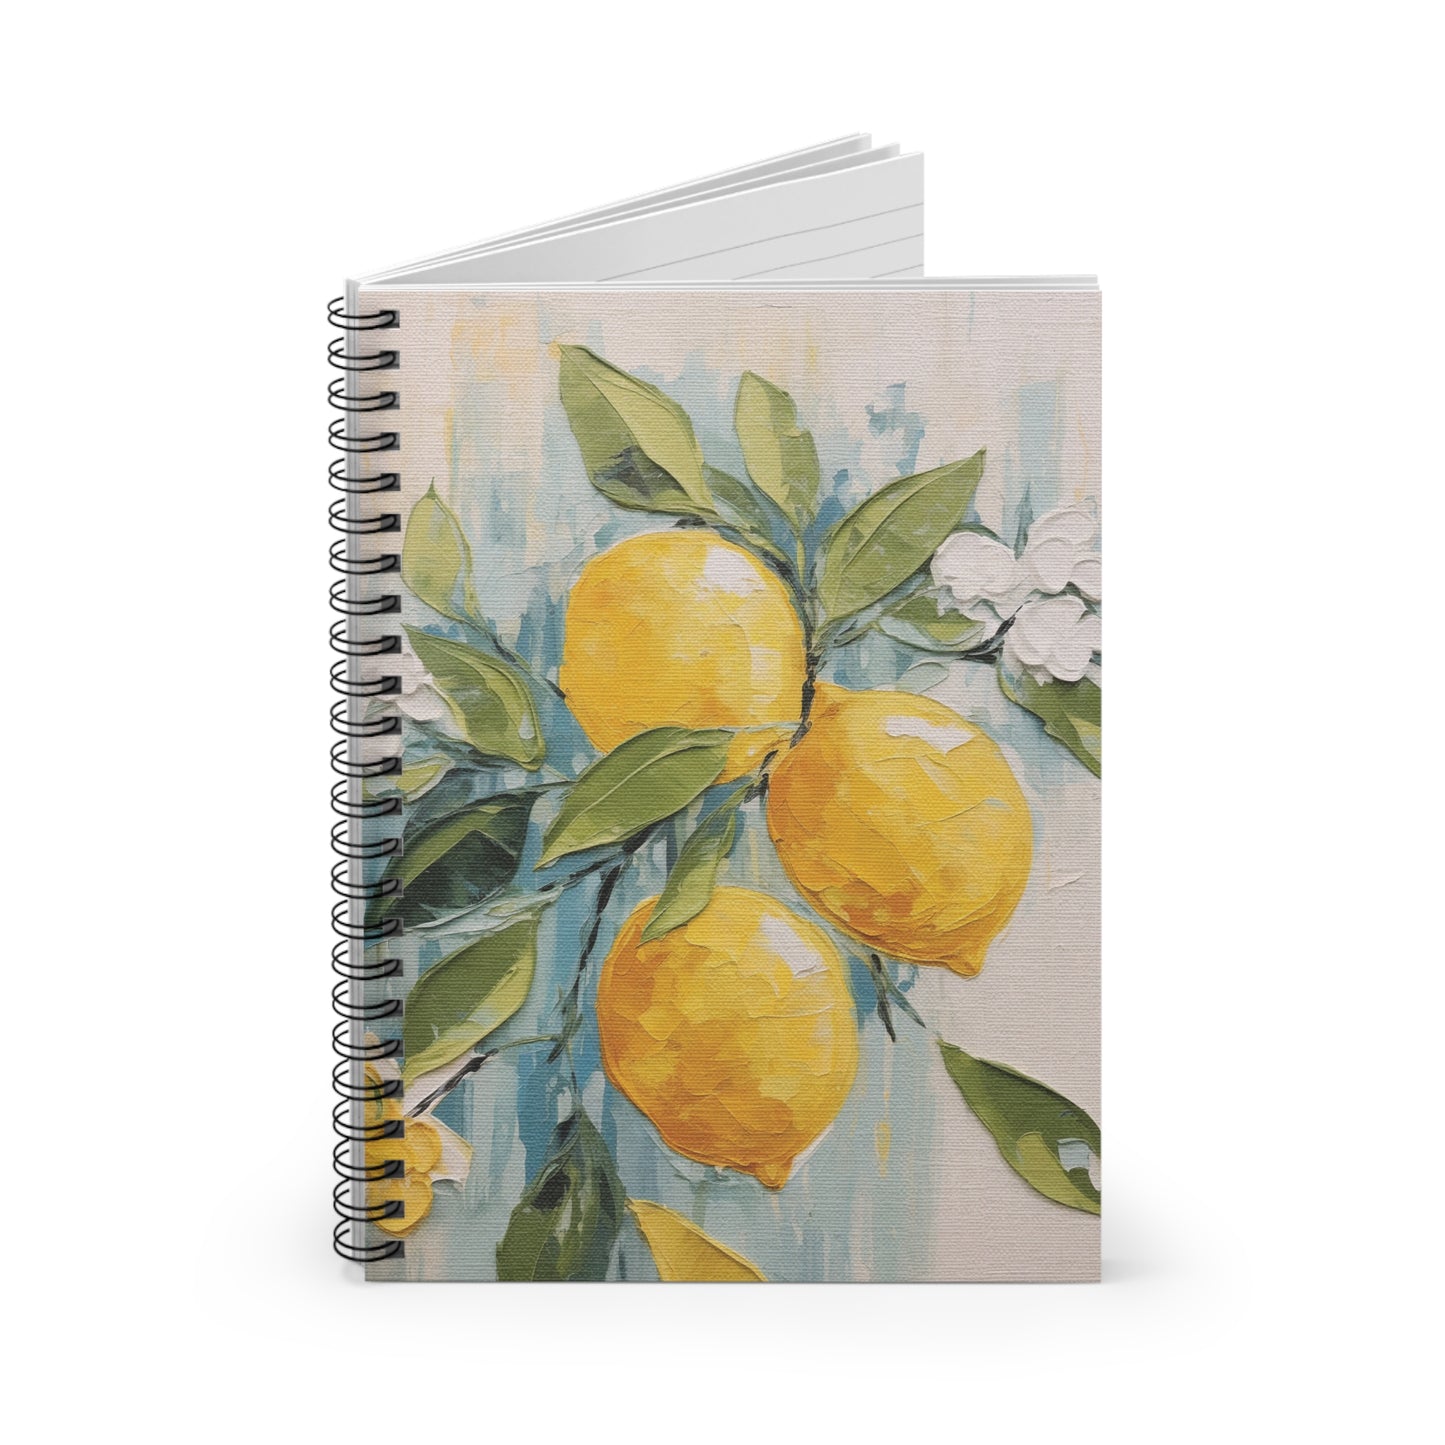 Lemon Art Print Notebook (2) - Composition Notebook, Spiral Notebook, Journal for Writing and Note-Taking